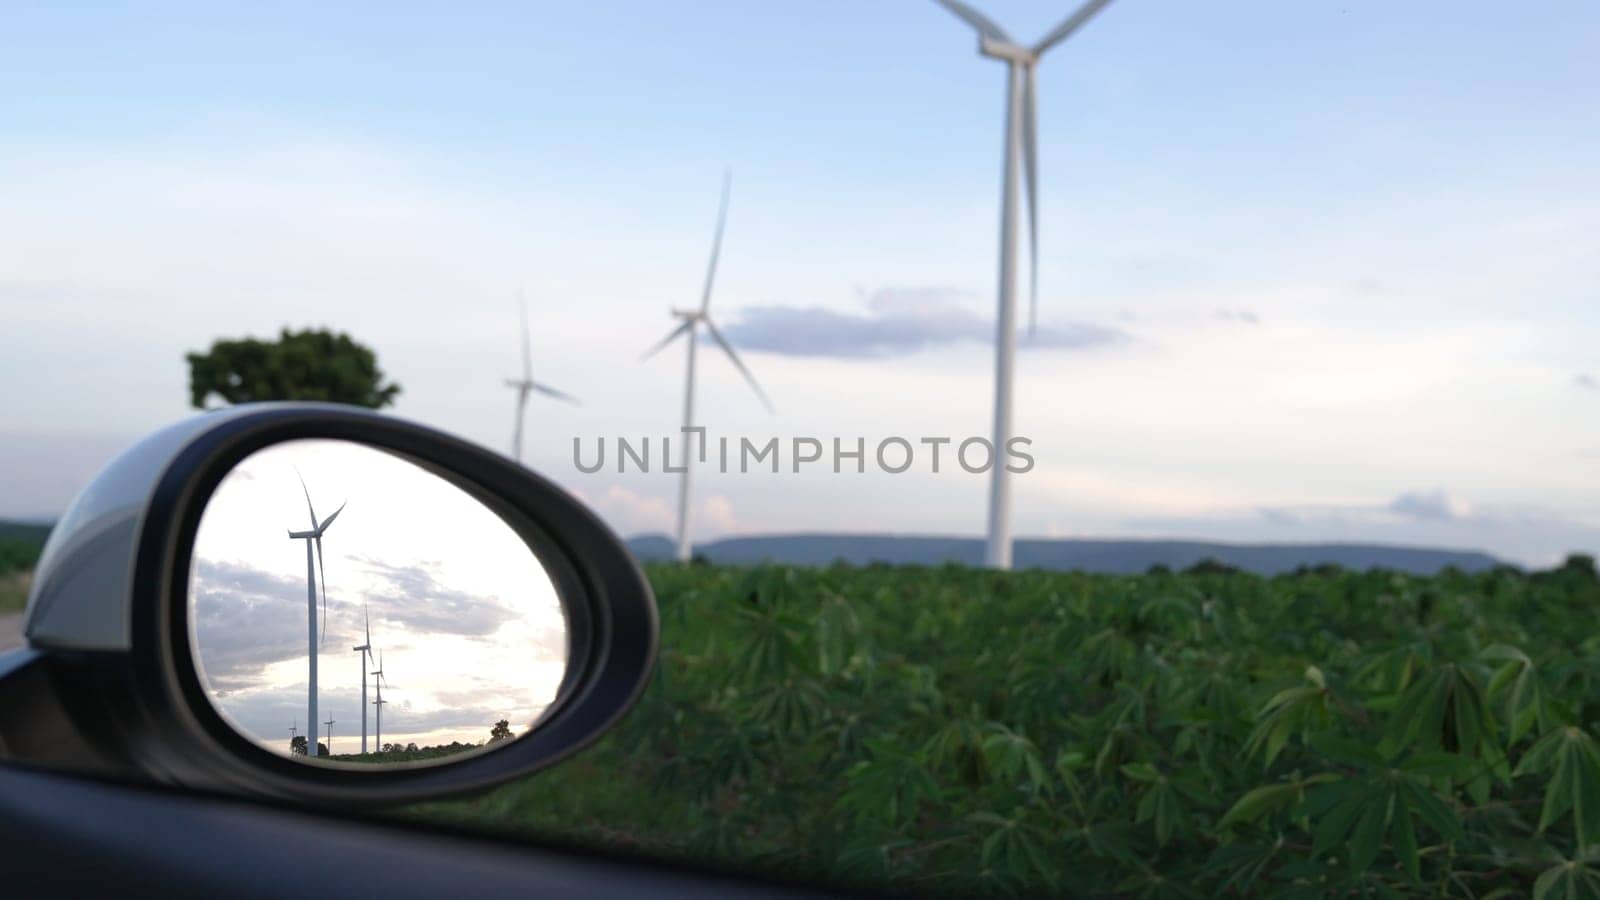 Progressive future energy infrastructure concept of wind turbine reflected in side mirror of electric vehicle being charged at charging station powered by green and renewable energy from wind turbine.